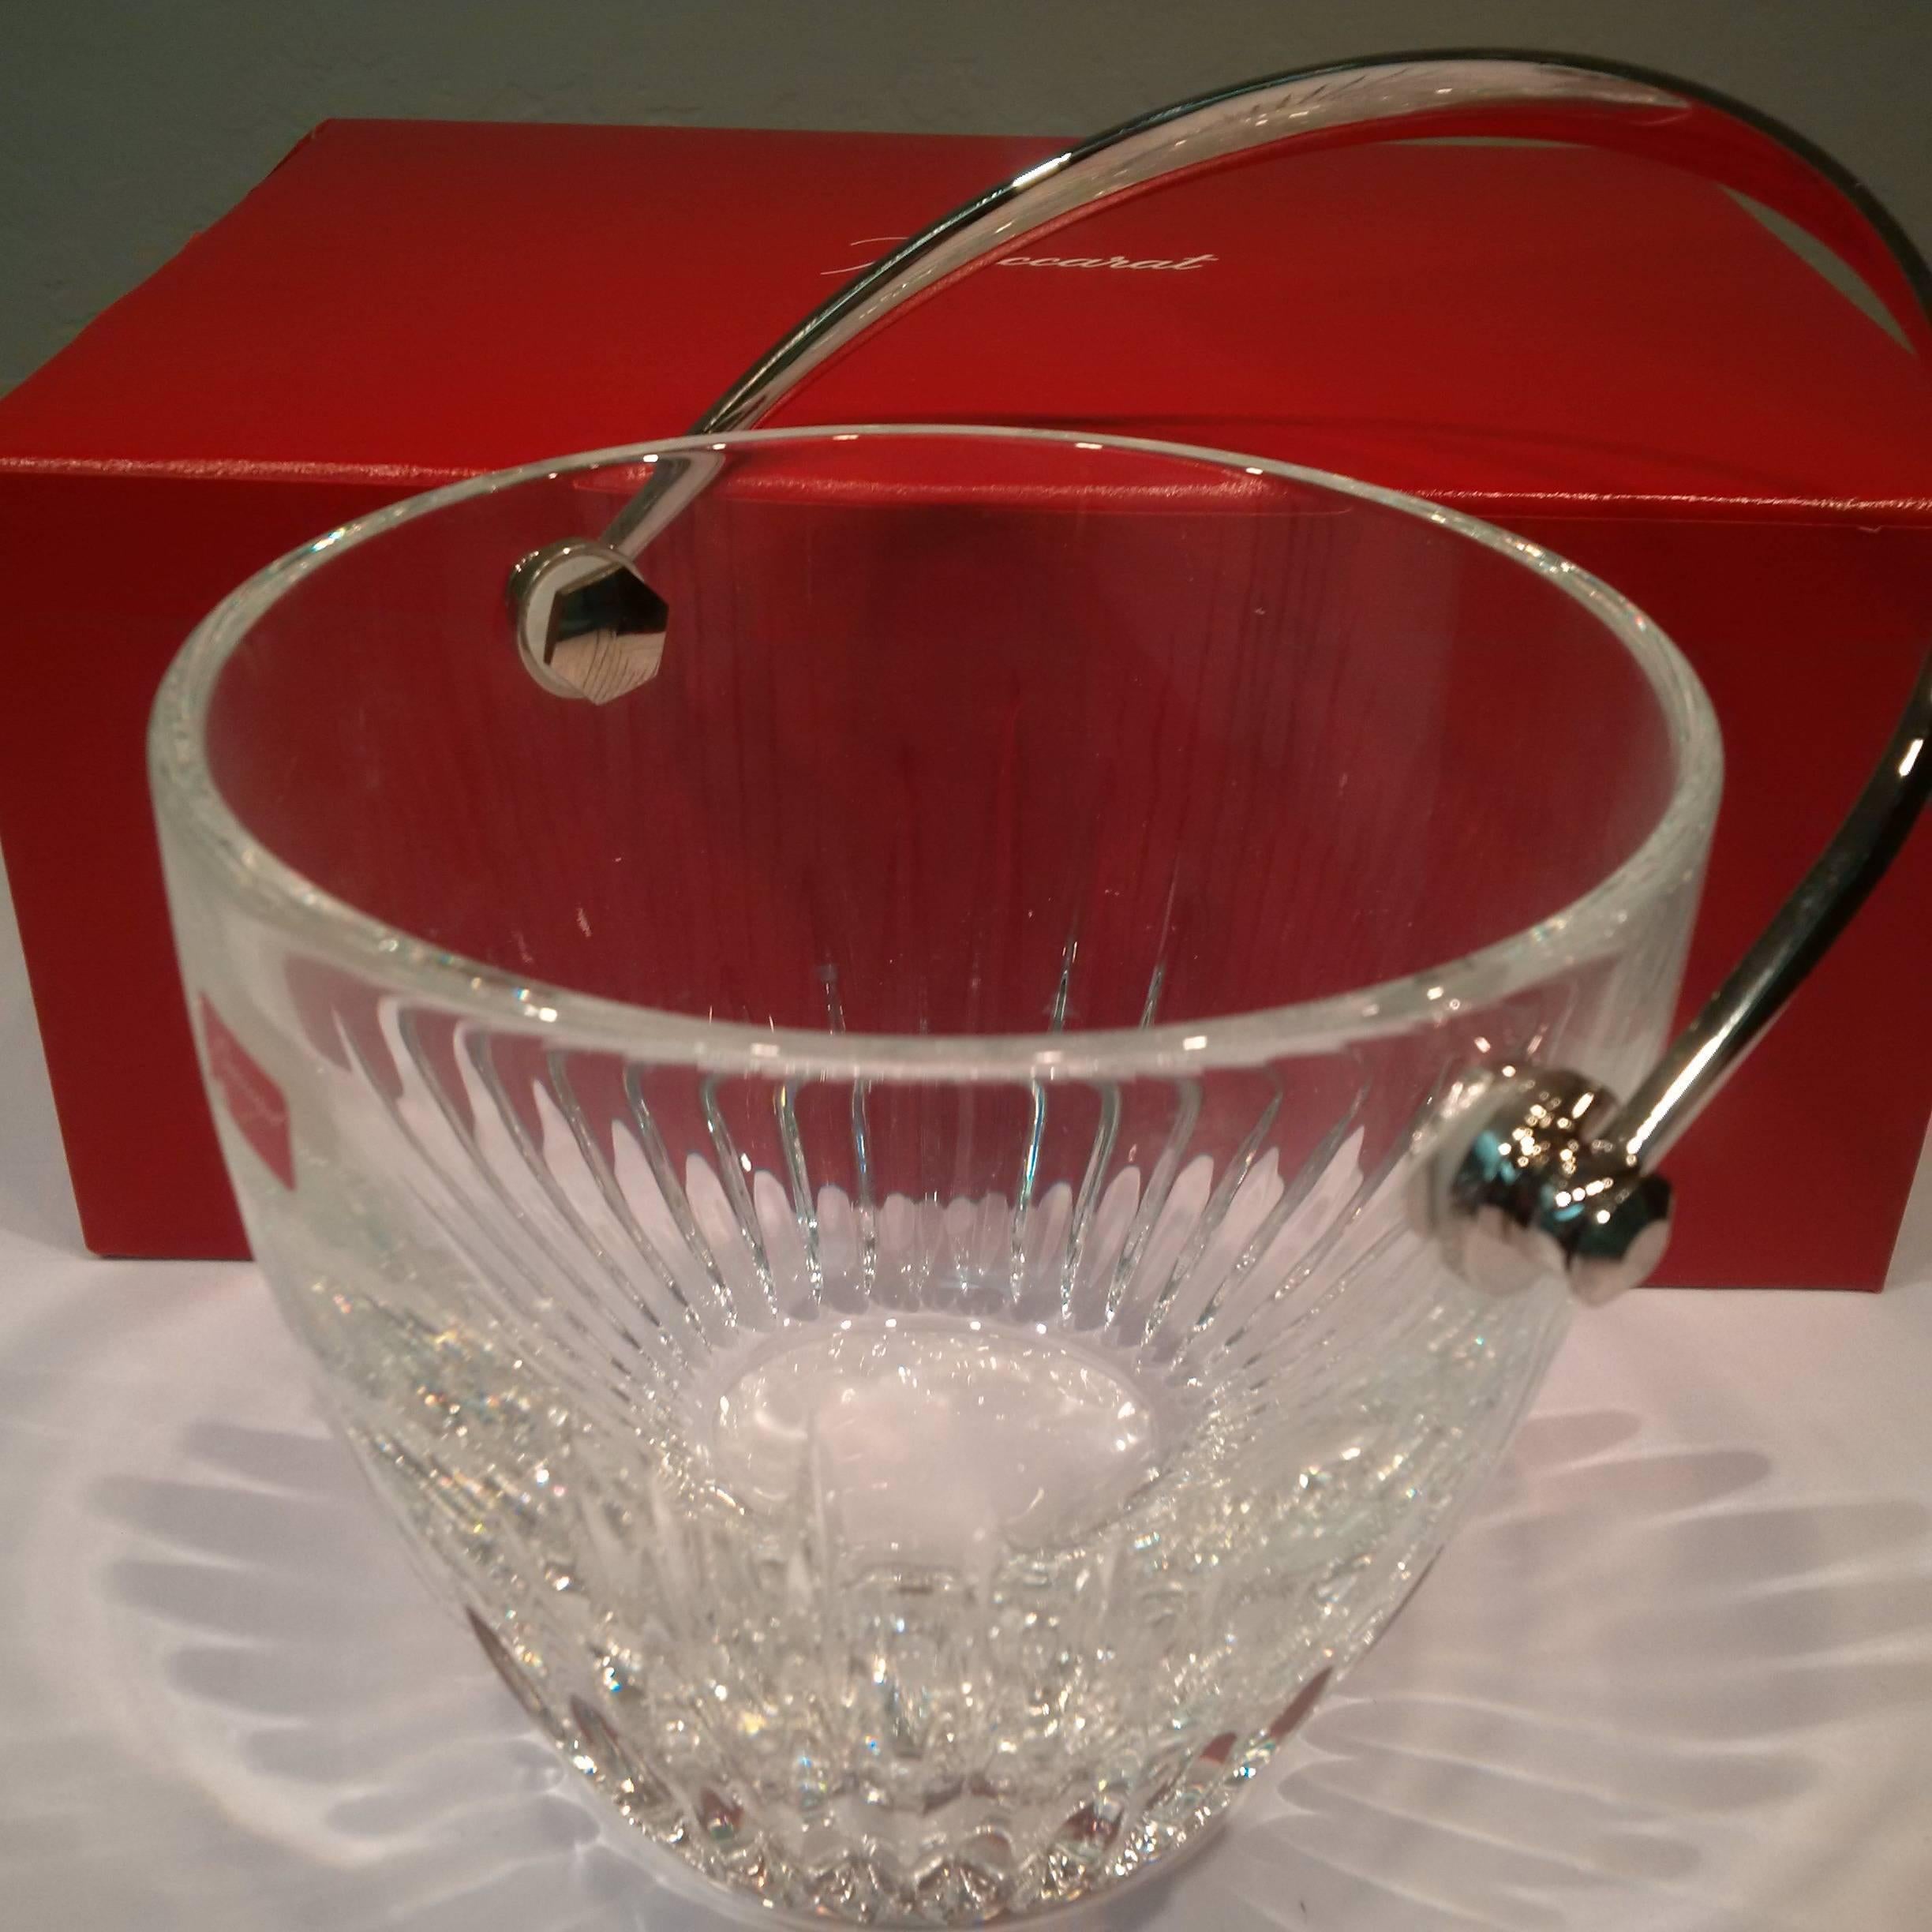 Baccarat Massena Ice Bucket in Lead Crystal with Stainless Steel Handle In Good Condition For Sale In Phoenix, AZ